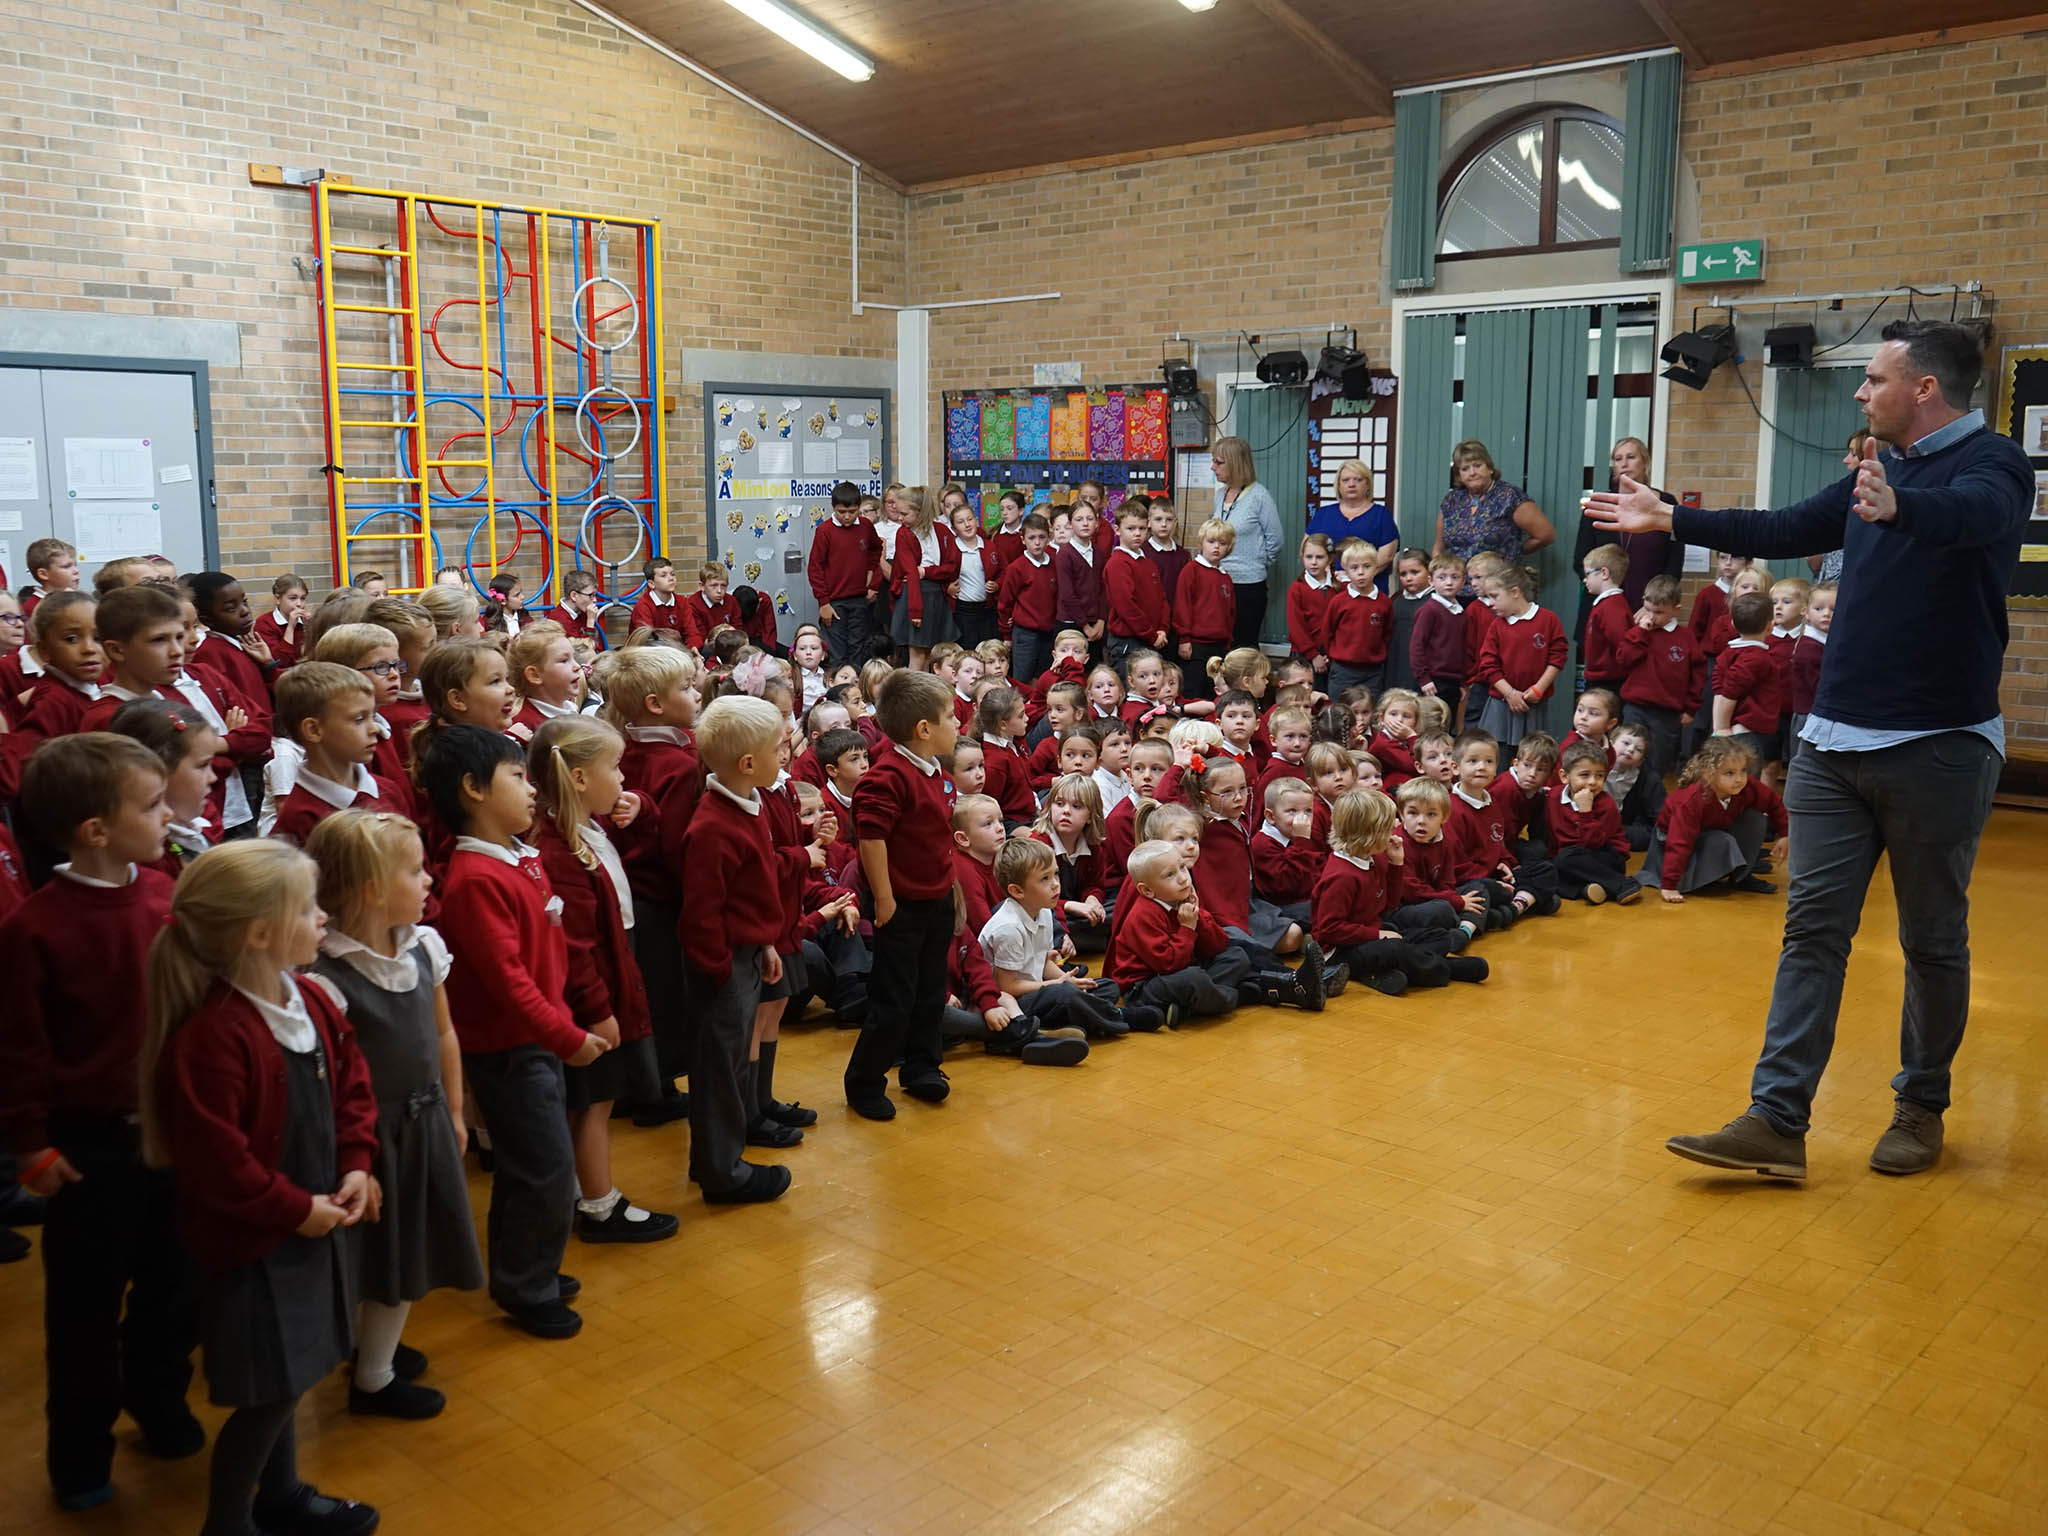 Kevin Mackay educating the children of Lawns Park primary school in Leeds in assembly about preventing food waste